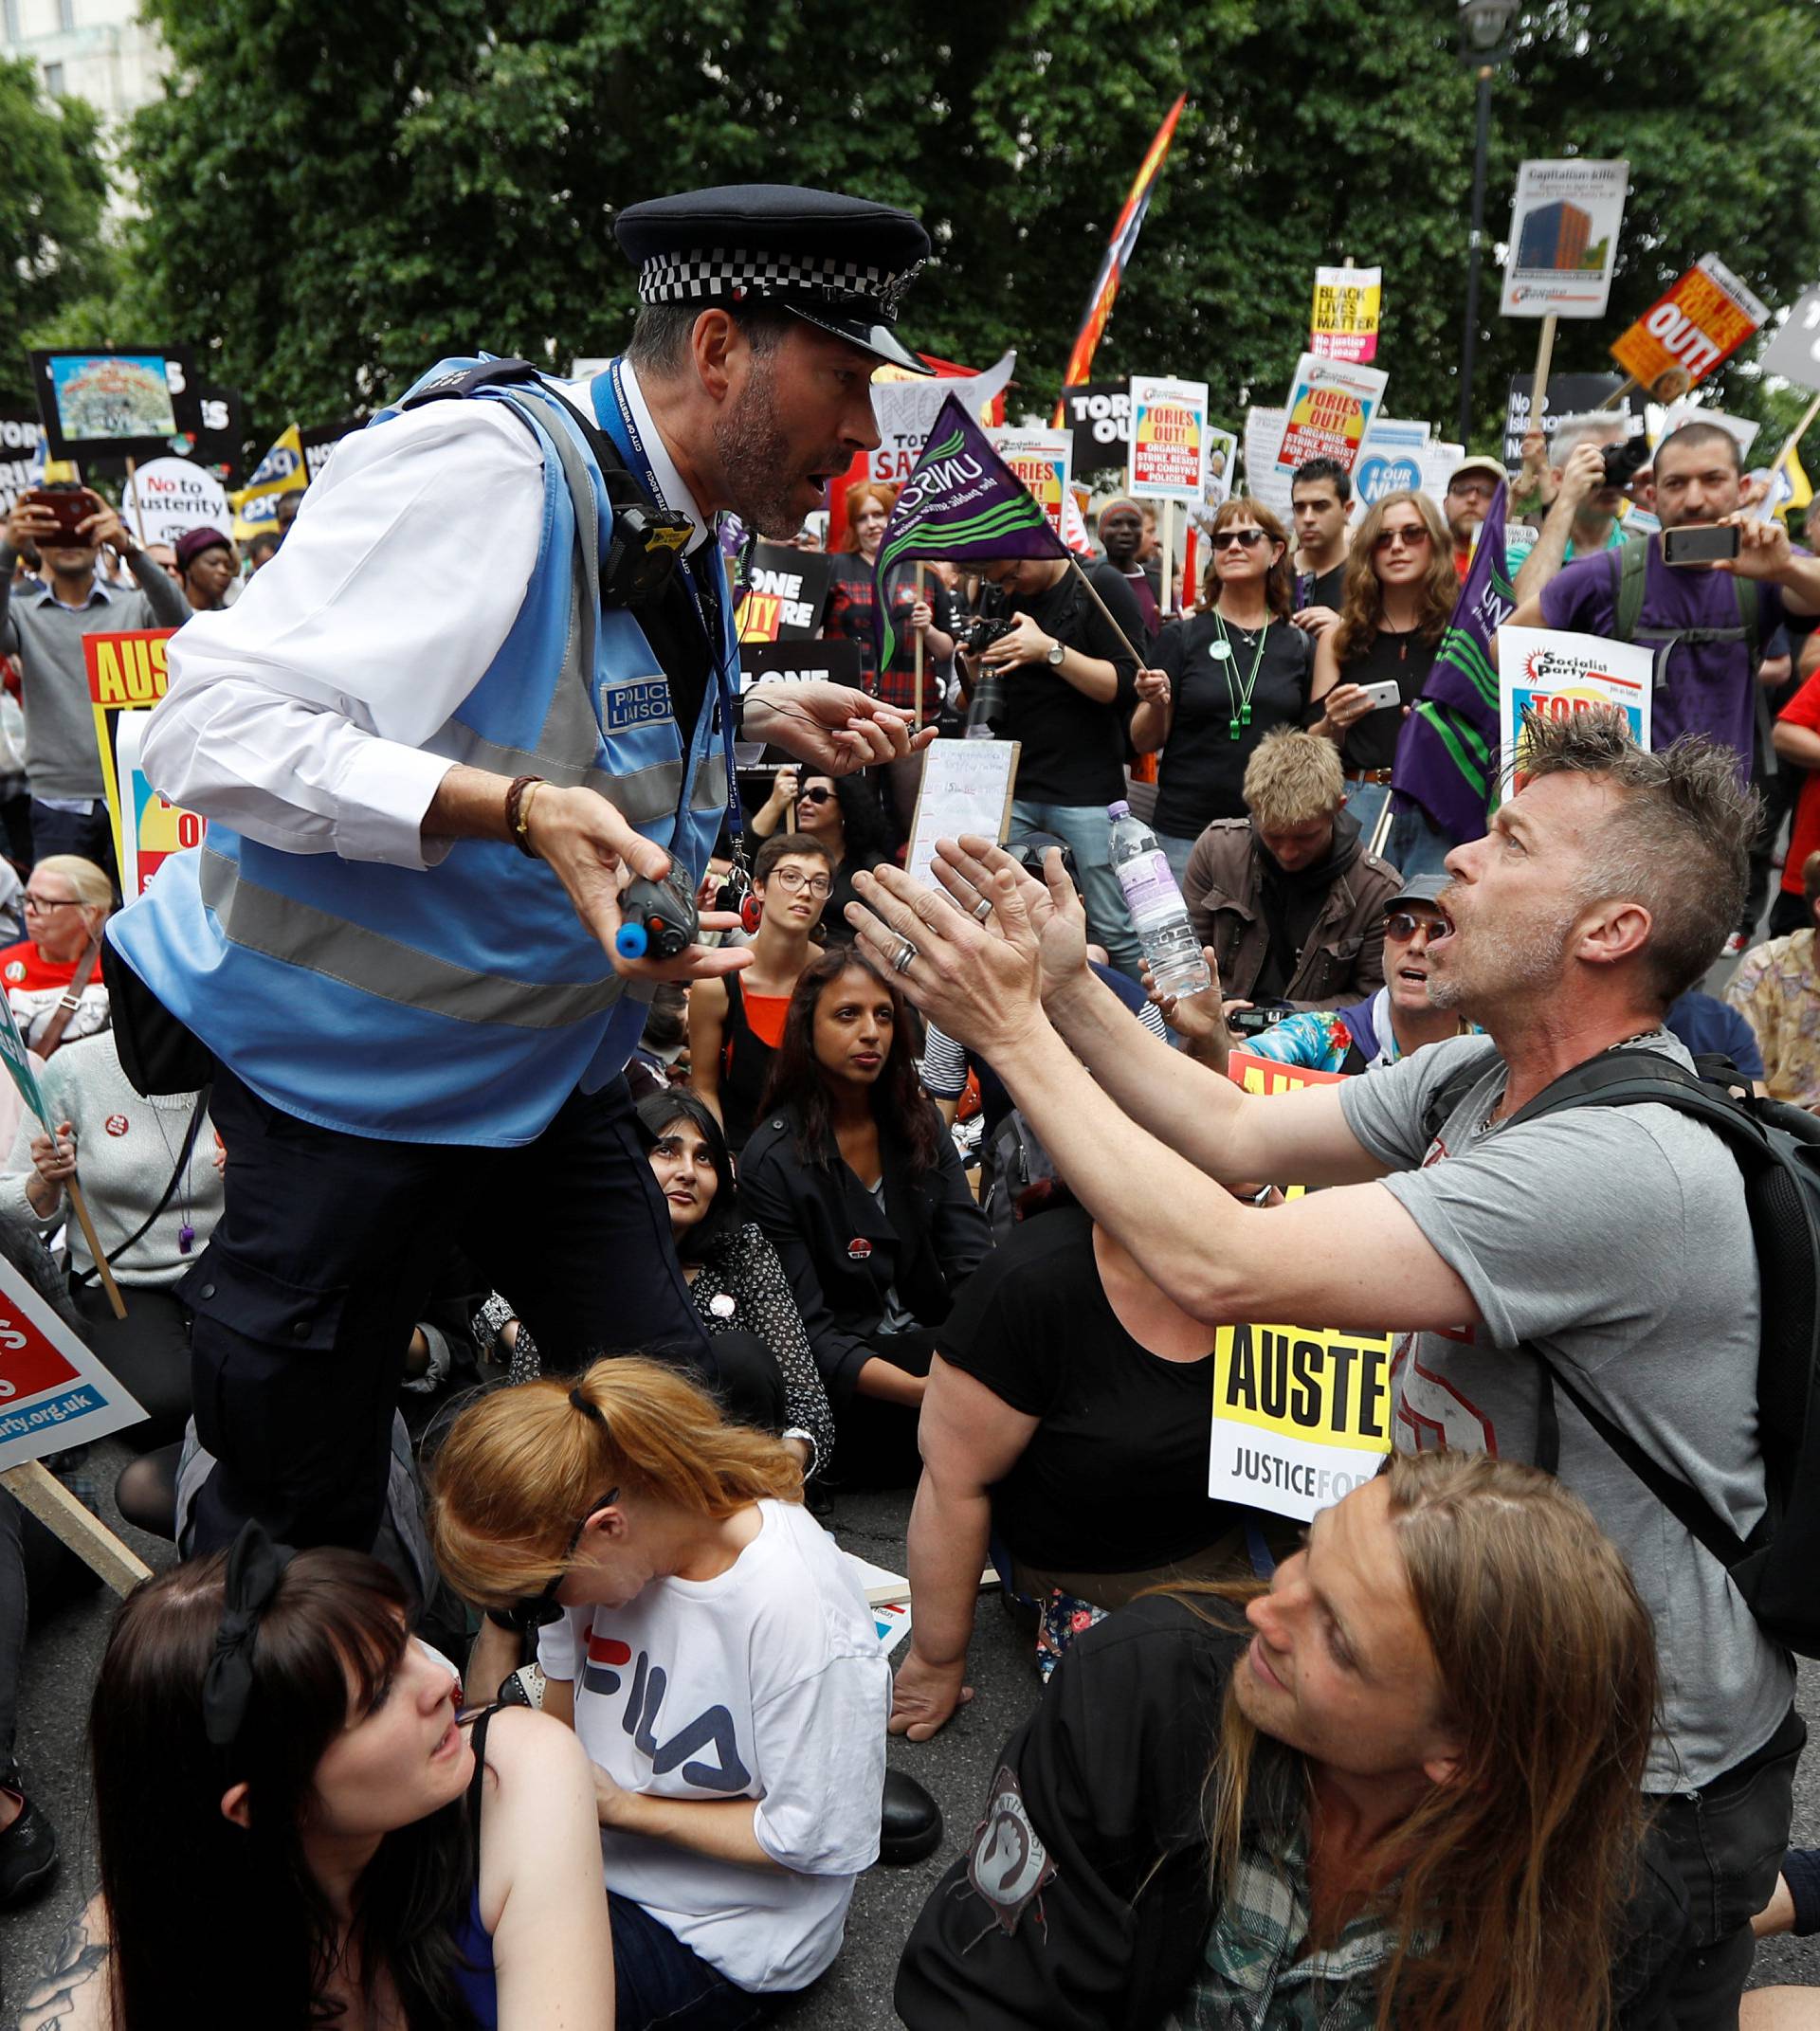 A police officer tells demonstrators to move during a sit-down protest outside Downing Street at an anti-austerity rally and march organised by campaigners Peoples' Assembly, in central London